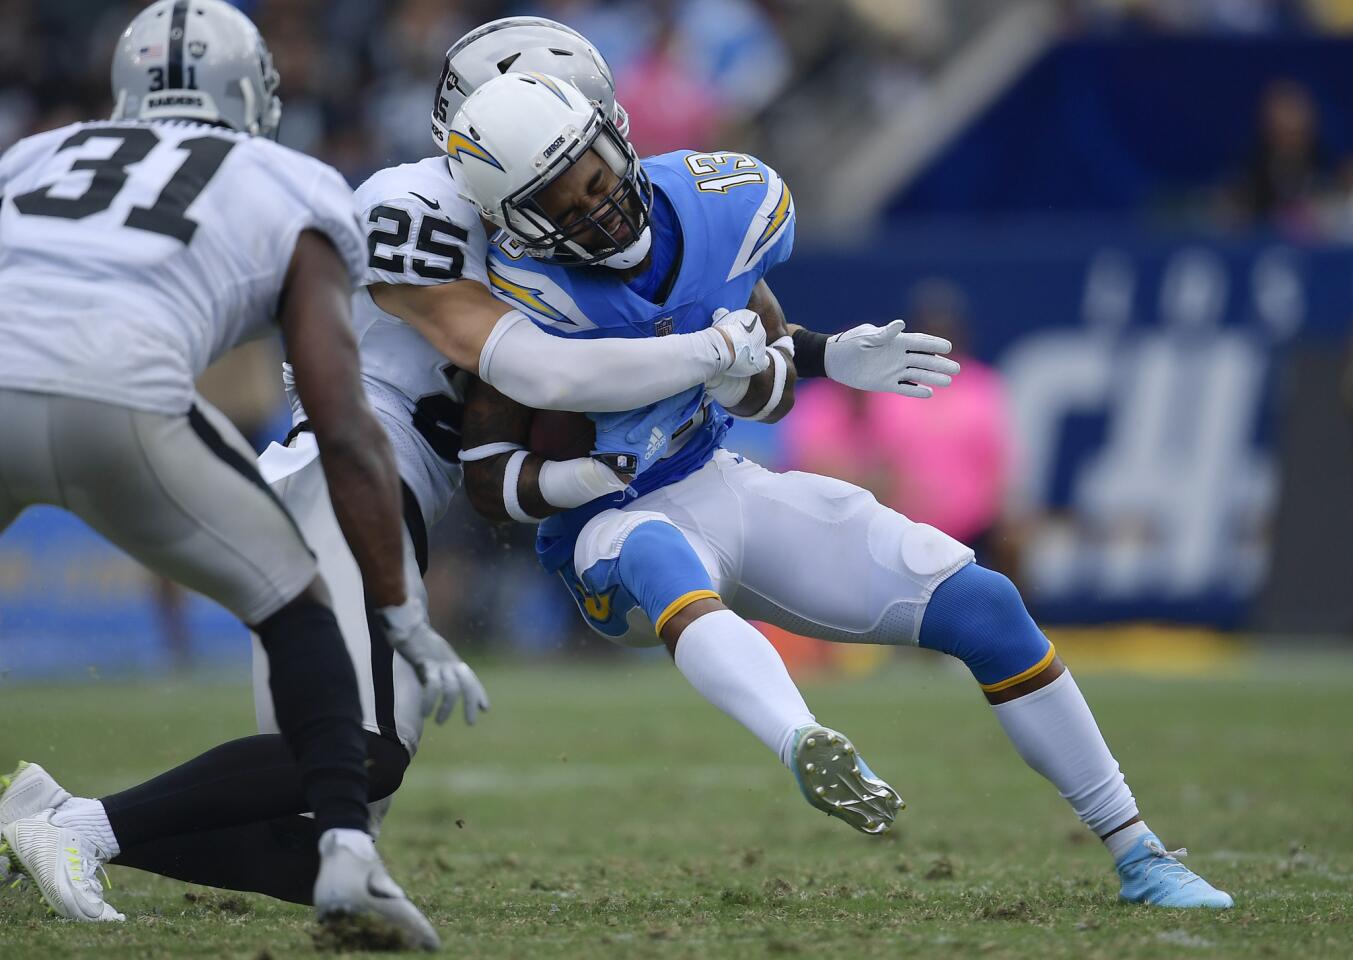 Los Angeles Chargers wide receiver Keenan Allen, center, is hit by Oakland Raiders defensive back Erik Harris during the second half of an NFL football game Sunday, Oct. 7, 2018, in Carson, Calif.